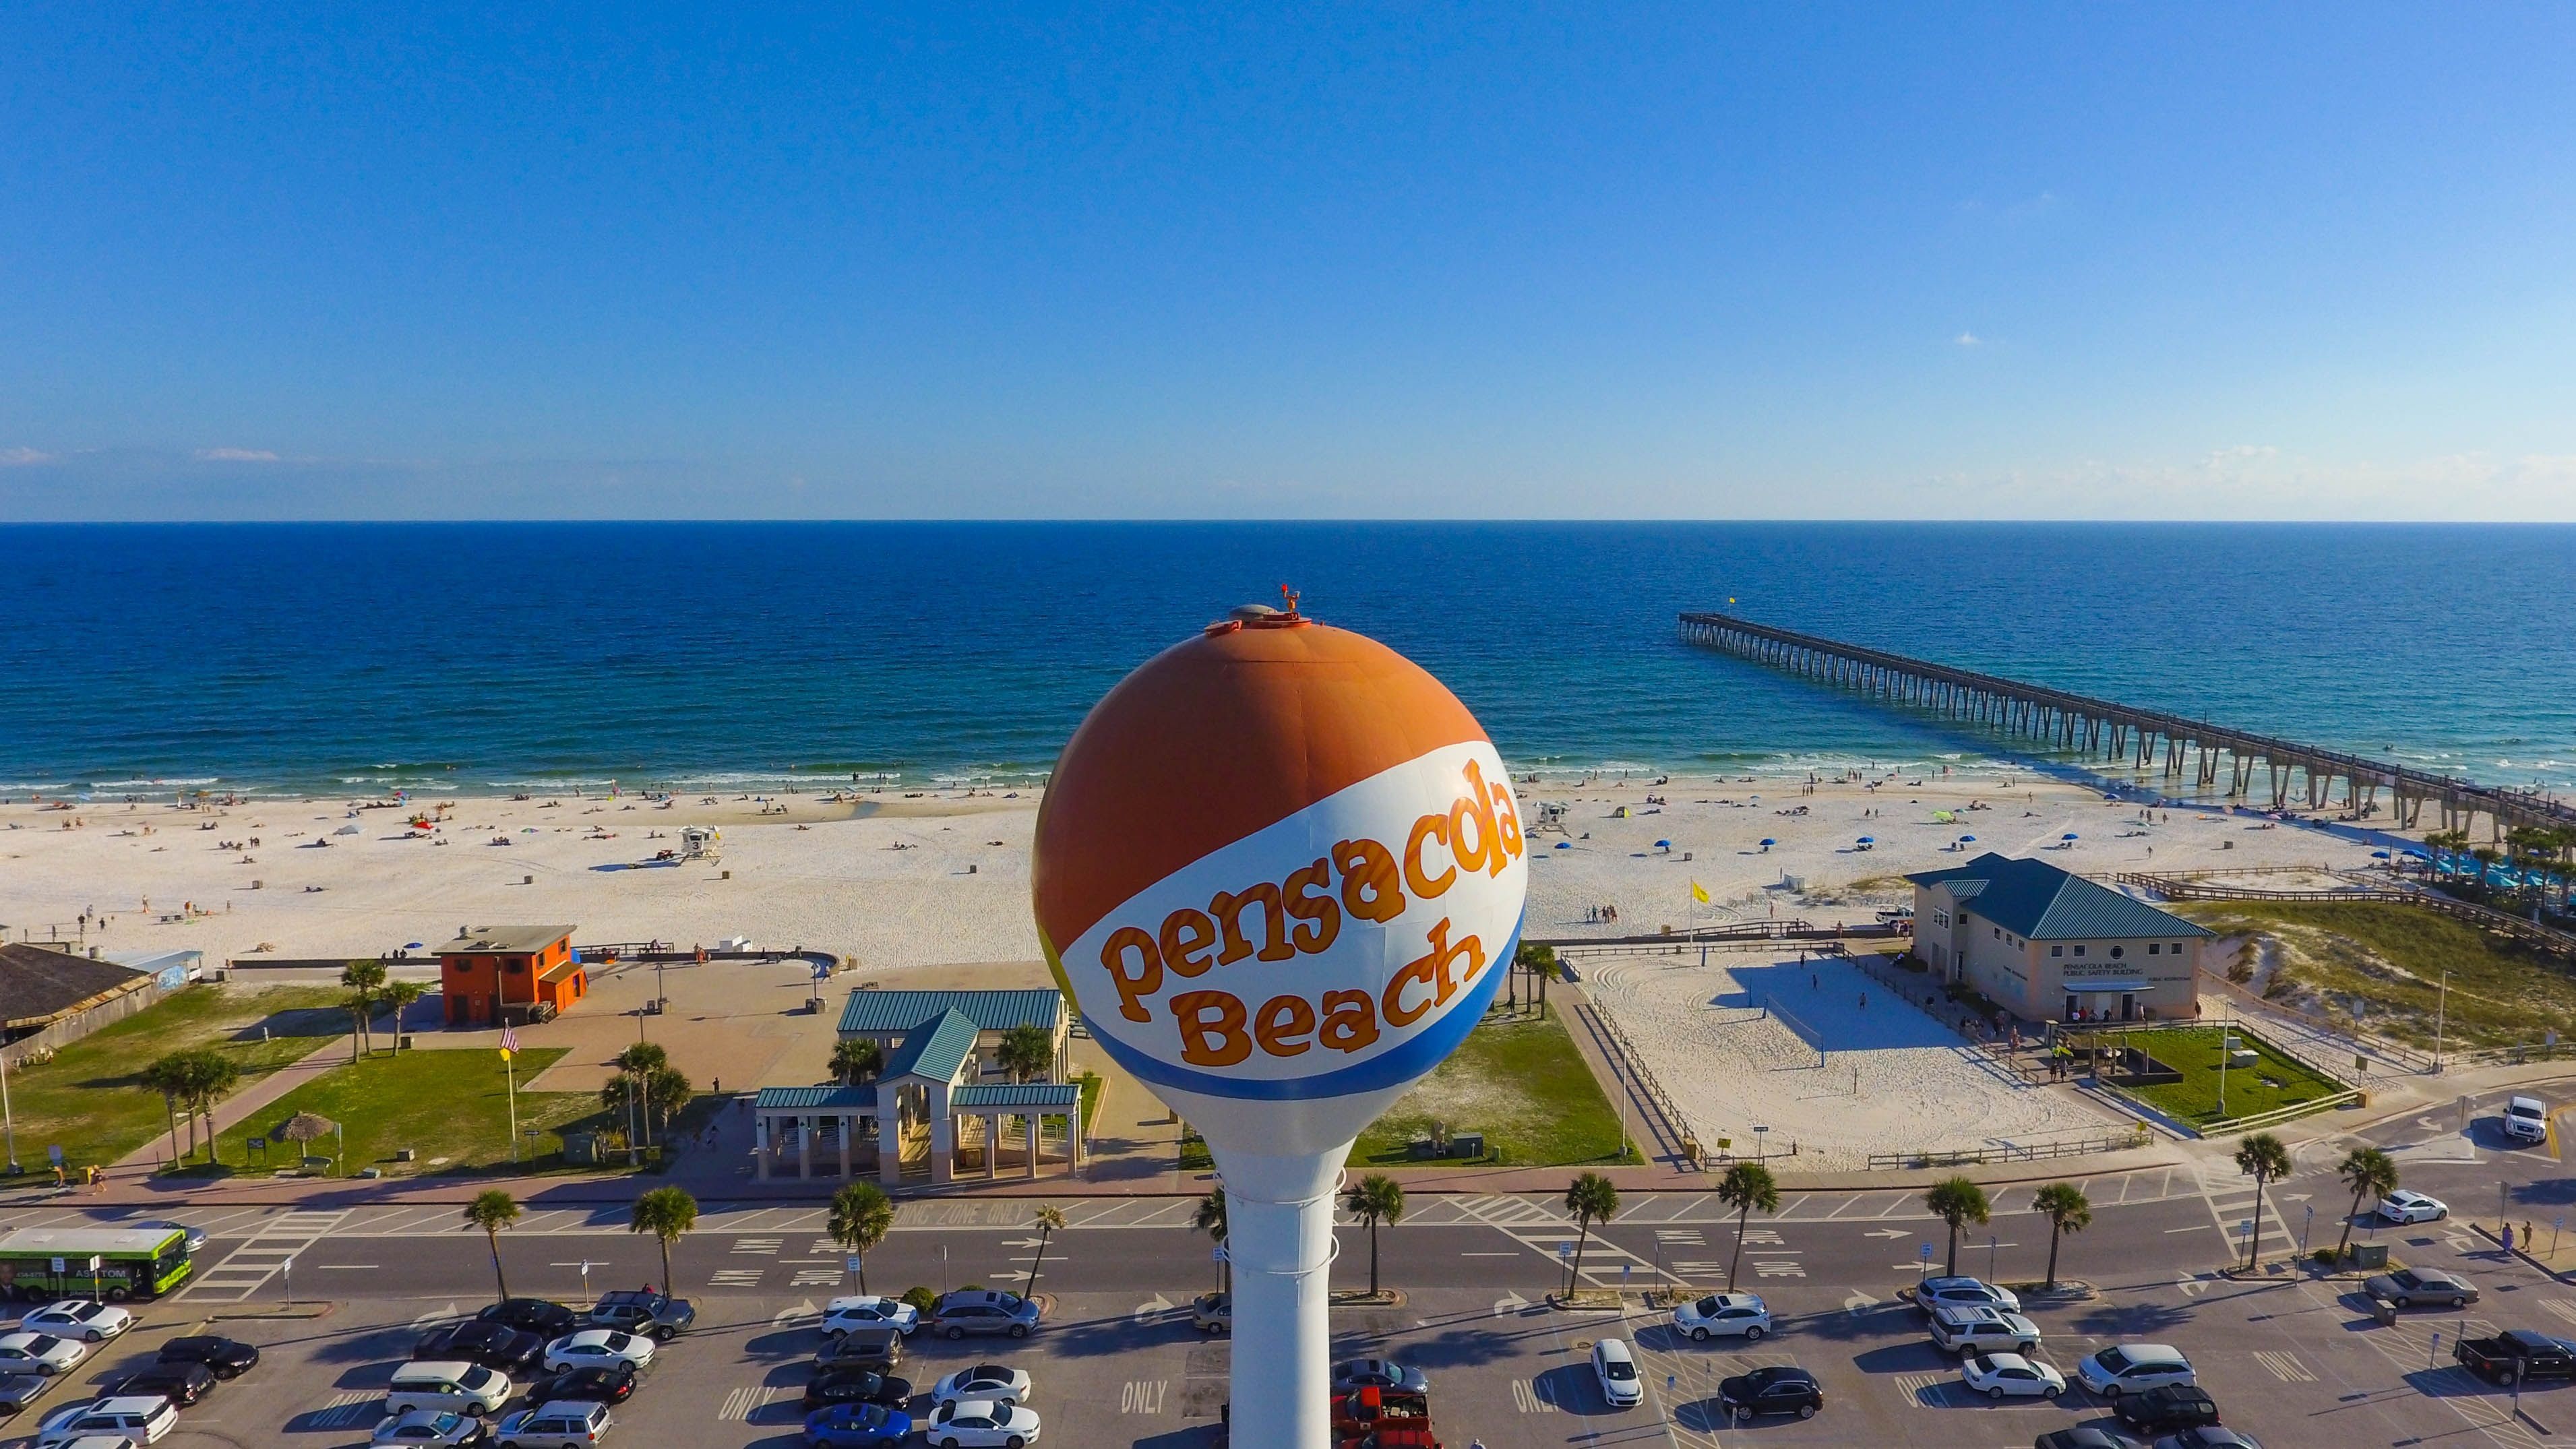 Pensacola Beach water tower, parking lot, beach, and pier at mid-day